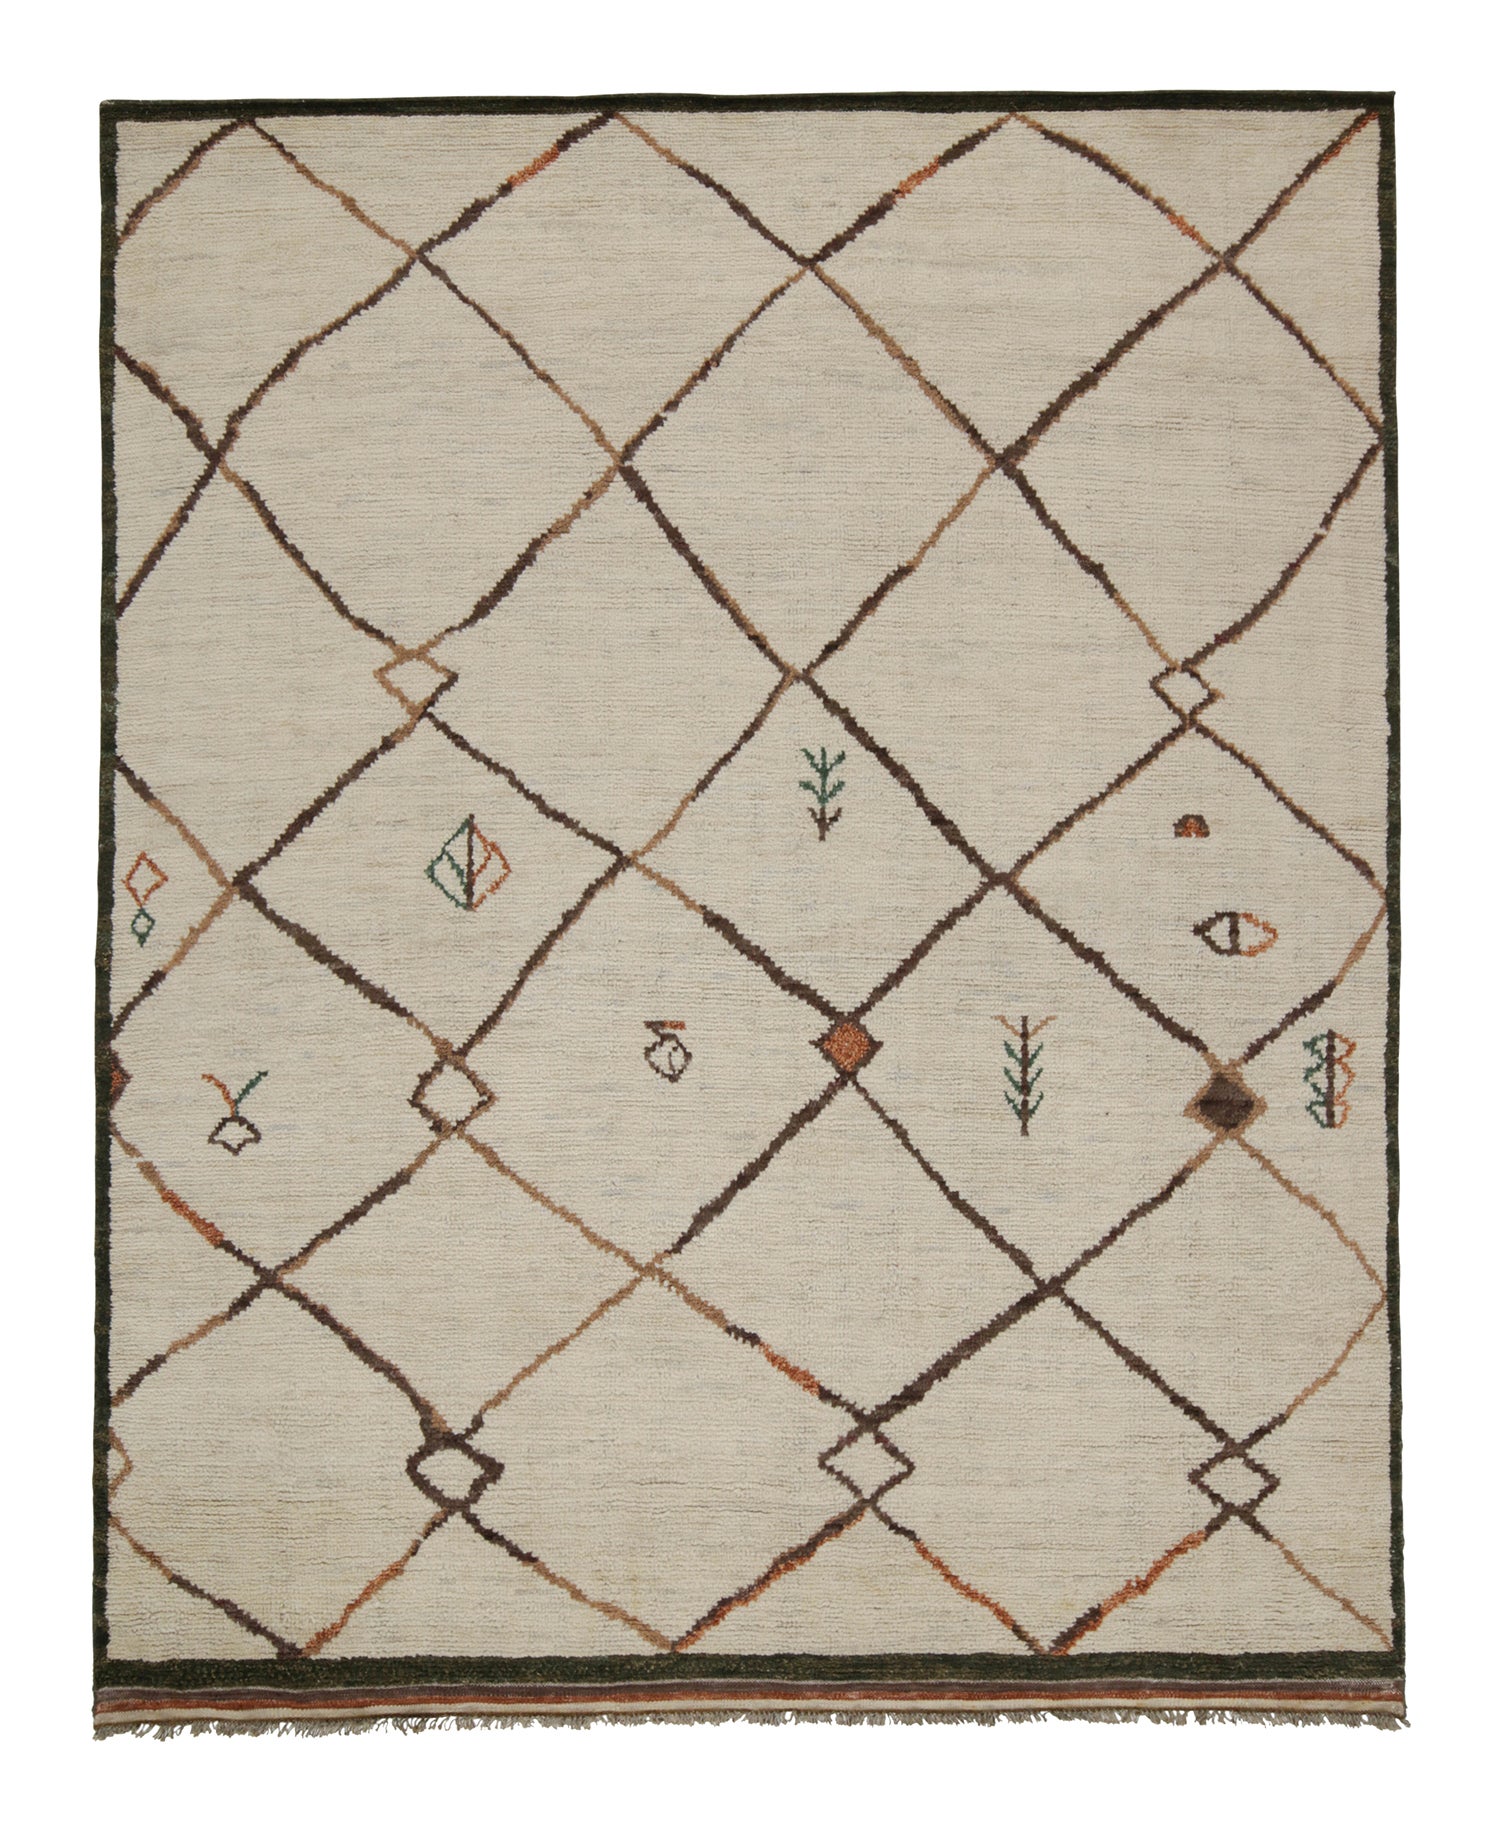 Rug & Kilim’s Moroccan style Rug in Beige with Brown Lattice Pattern